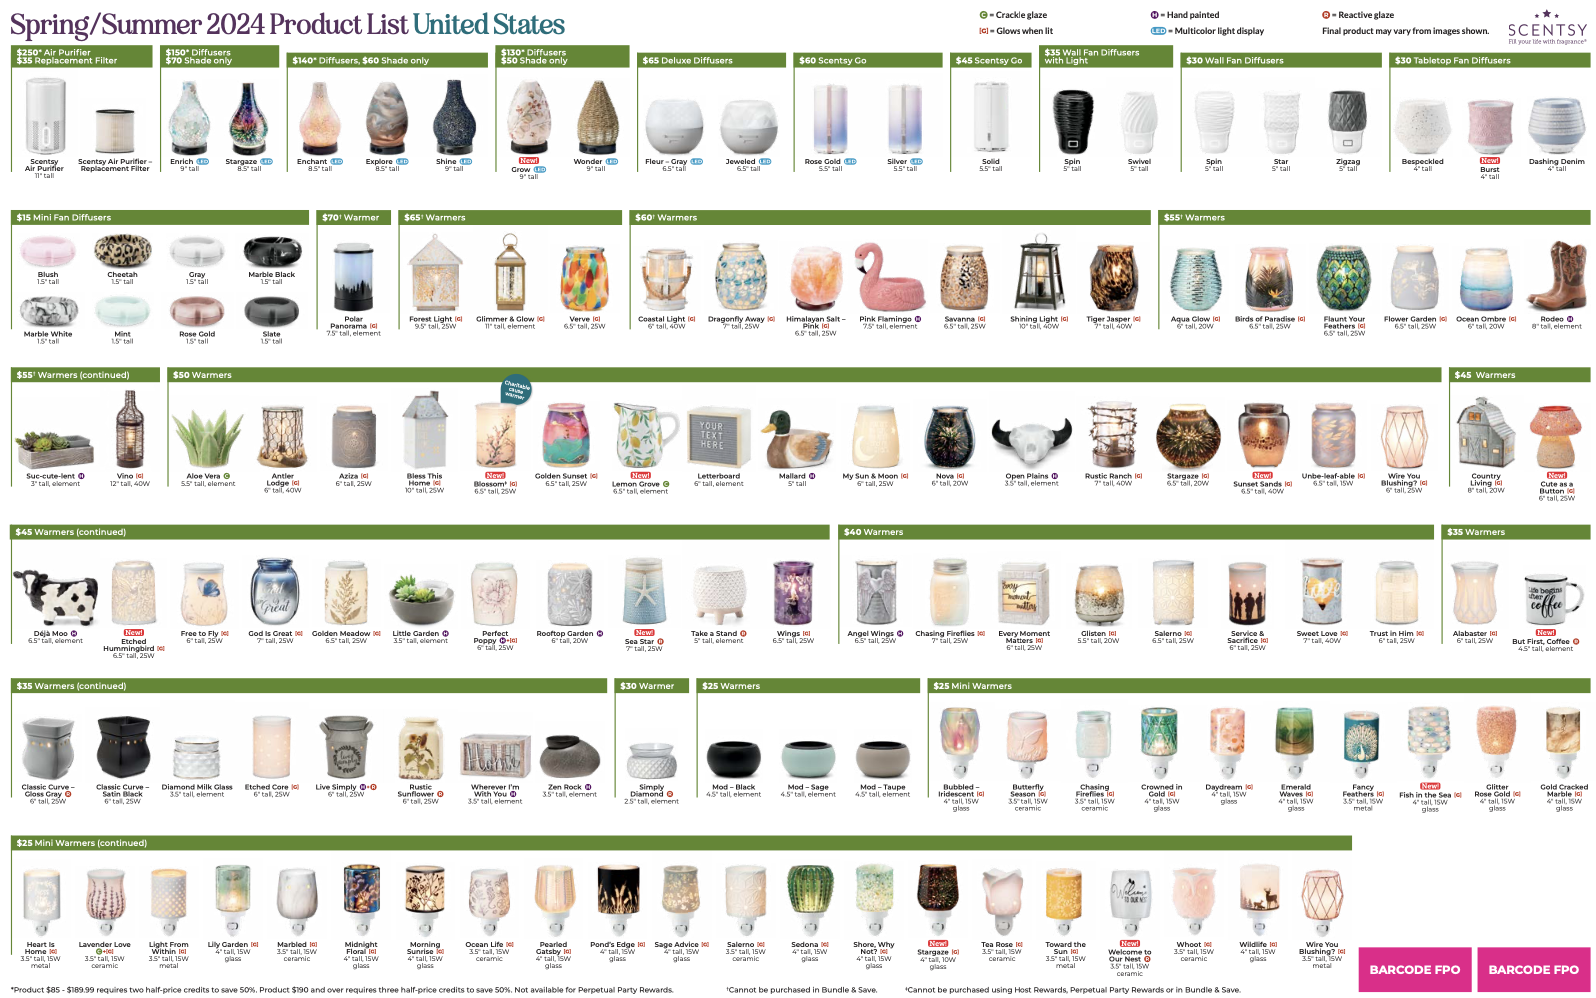 scentsy-2024-spring-summer-product-list